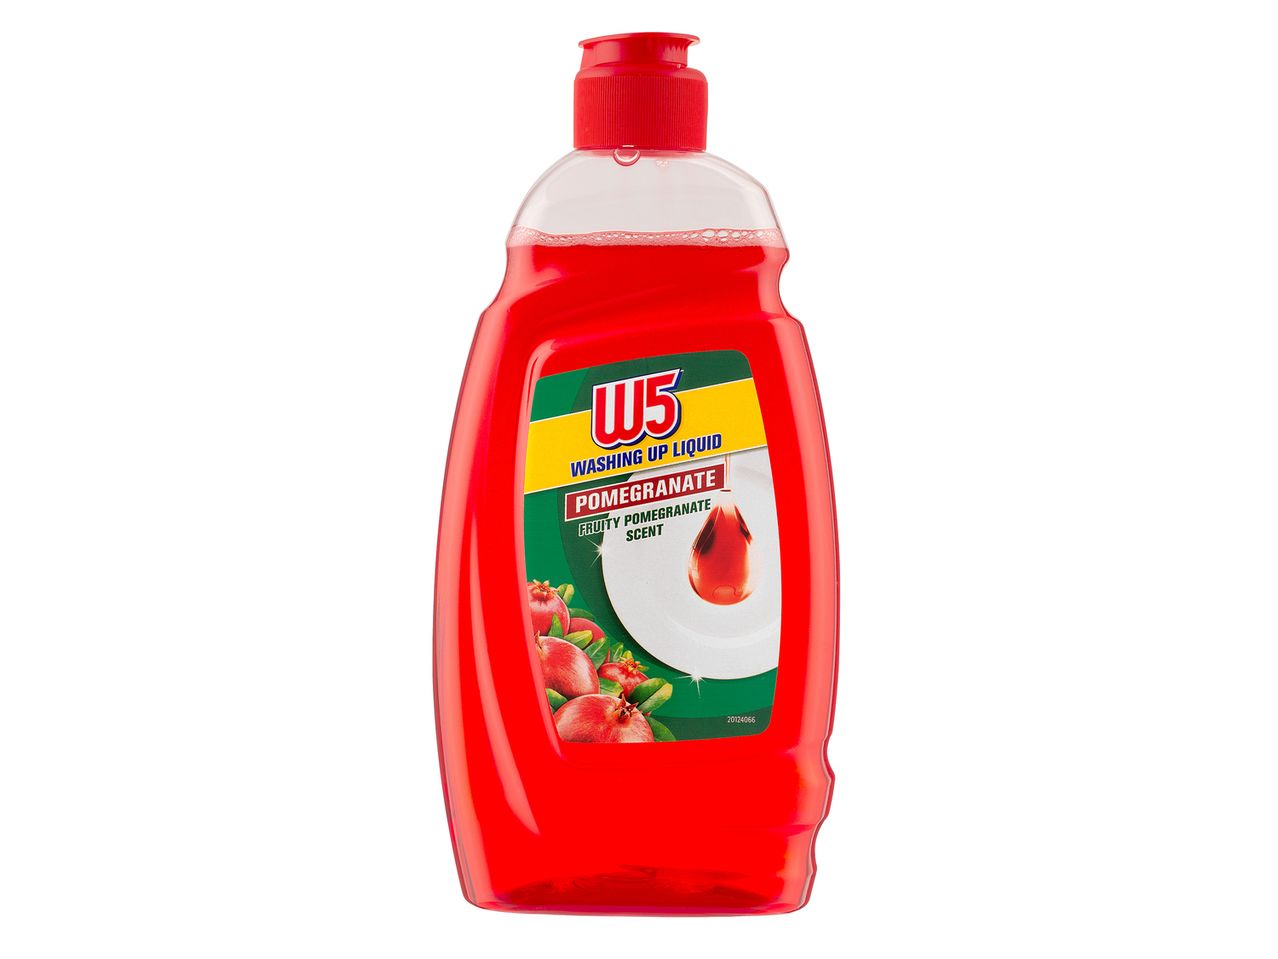 Go to full screen view: W5 Concentrated Washing Up Liquid - Image 3